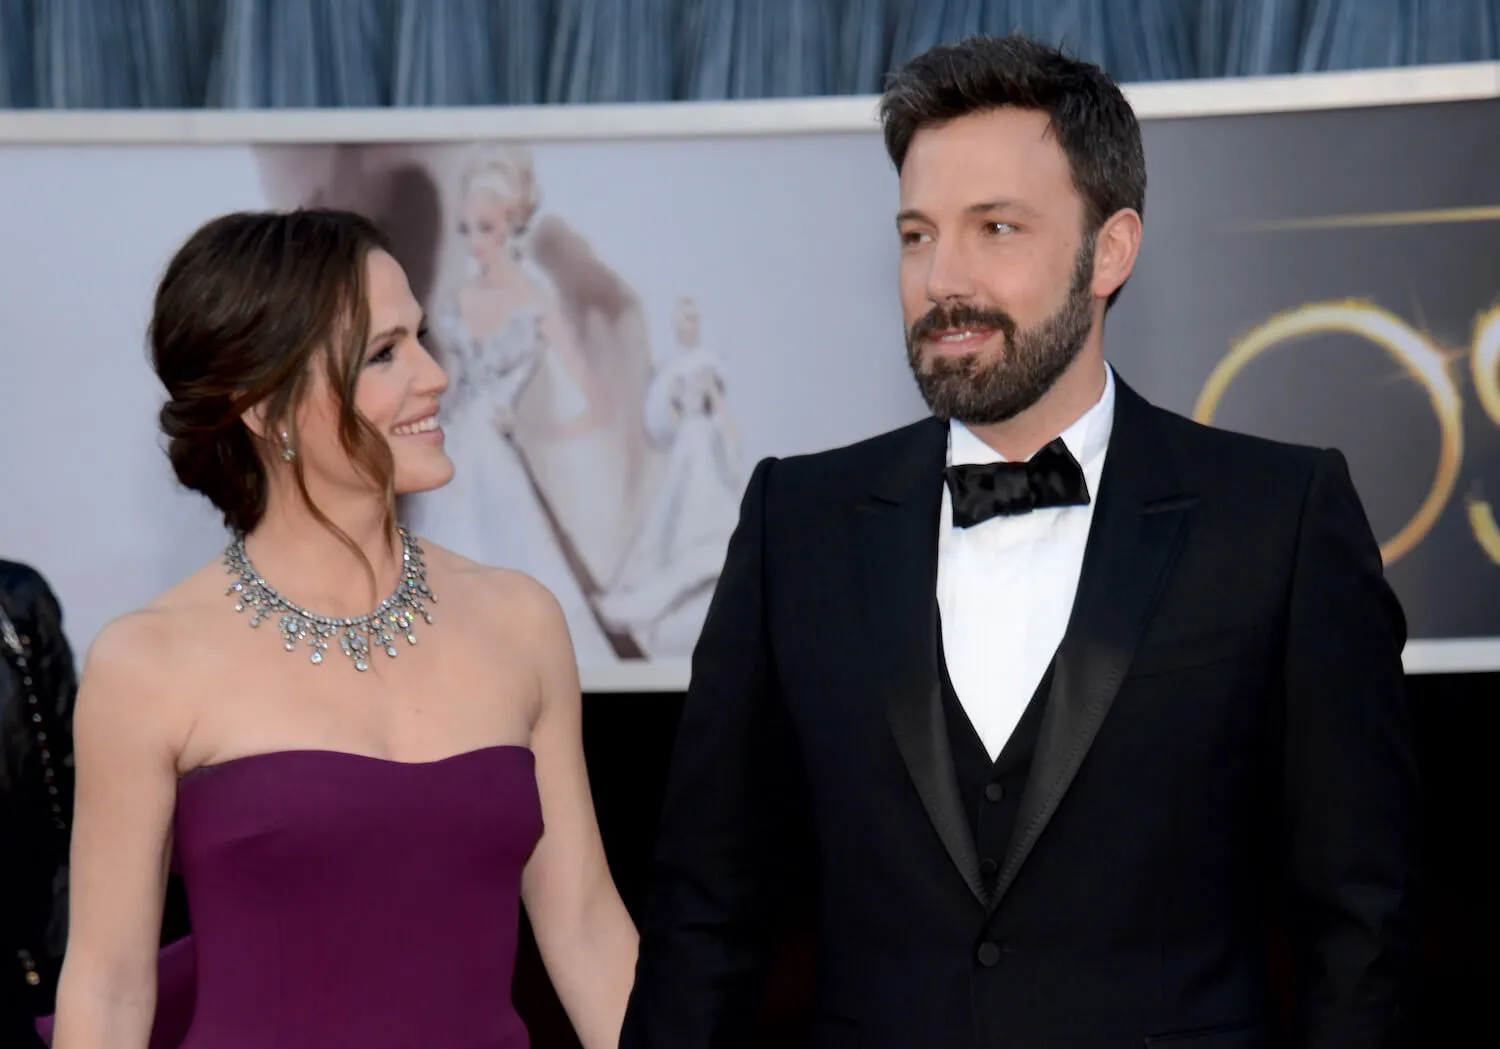 Jennifer Garner in a purple strapless dress looking next to her at Ben Affleck in a suit at the Academy Awards in 2013